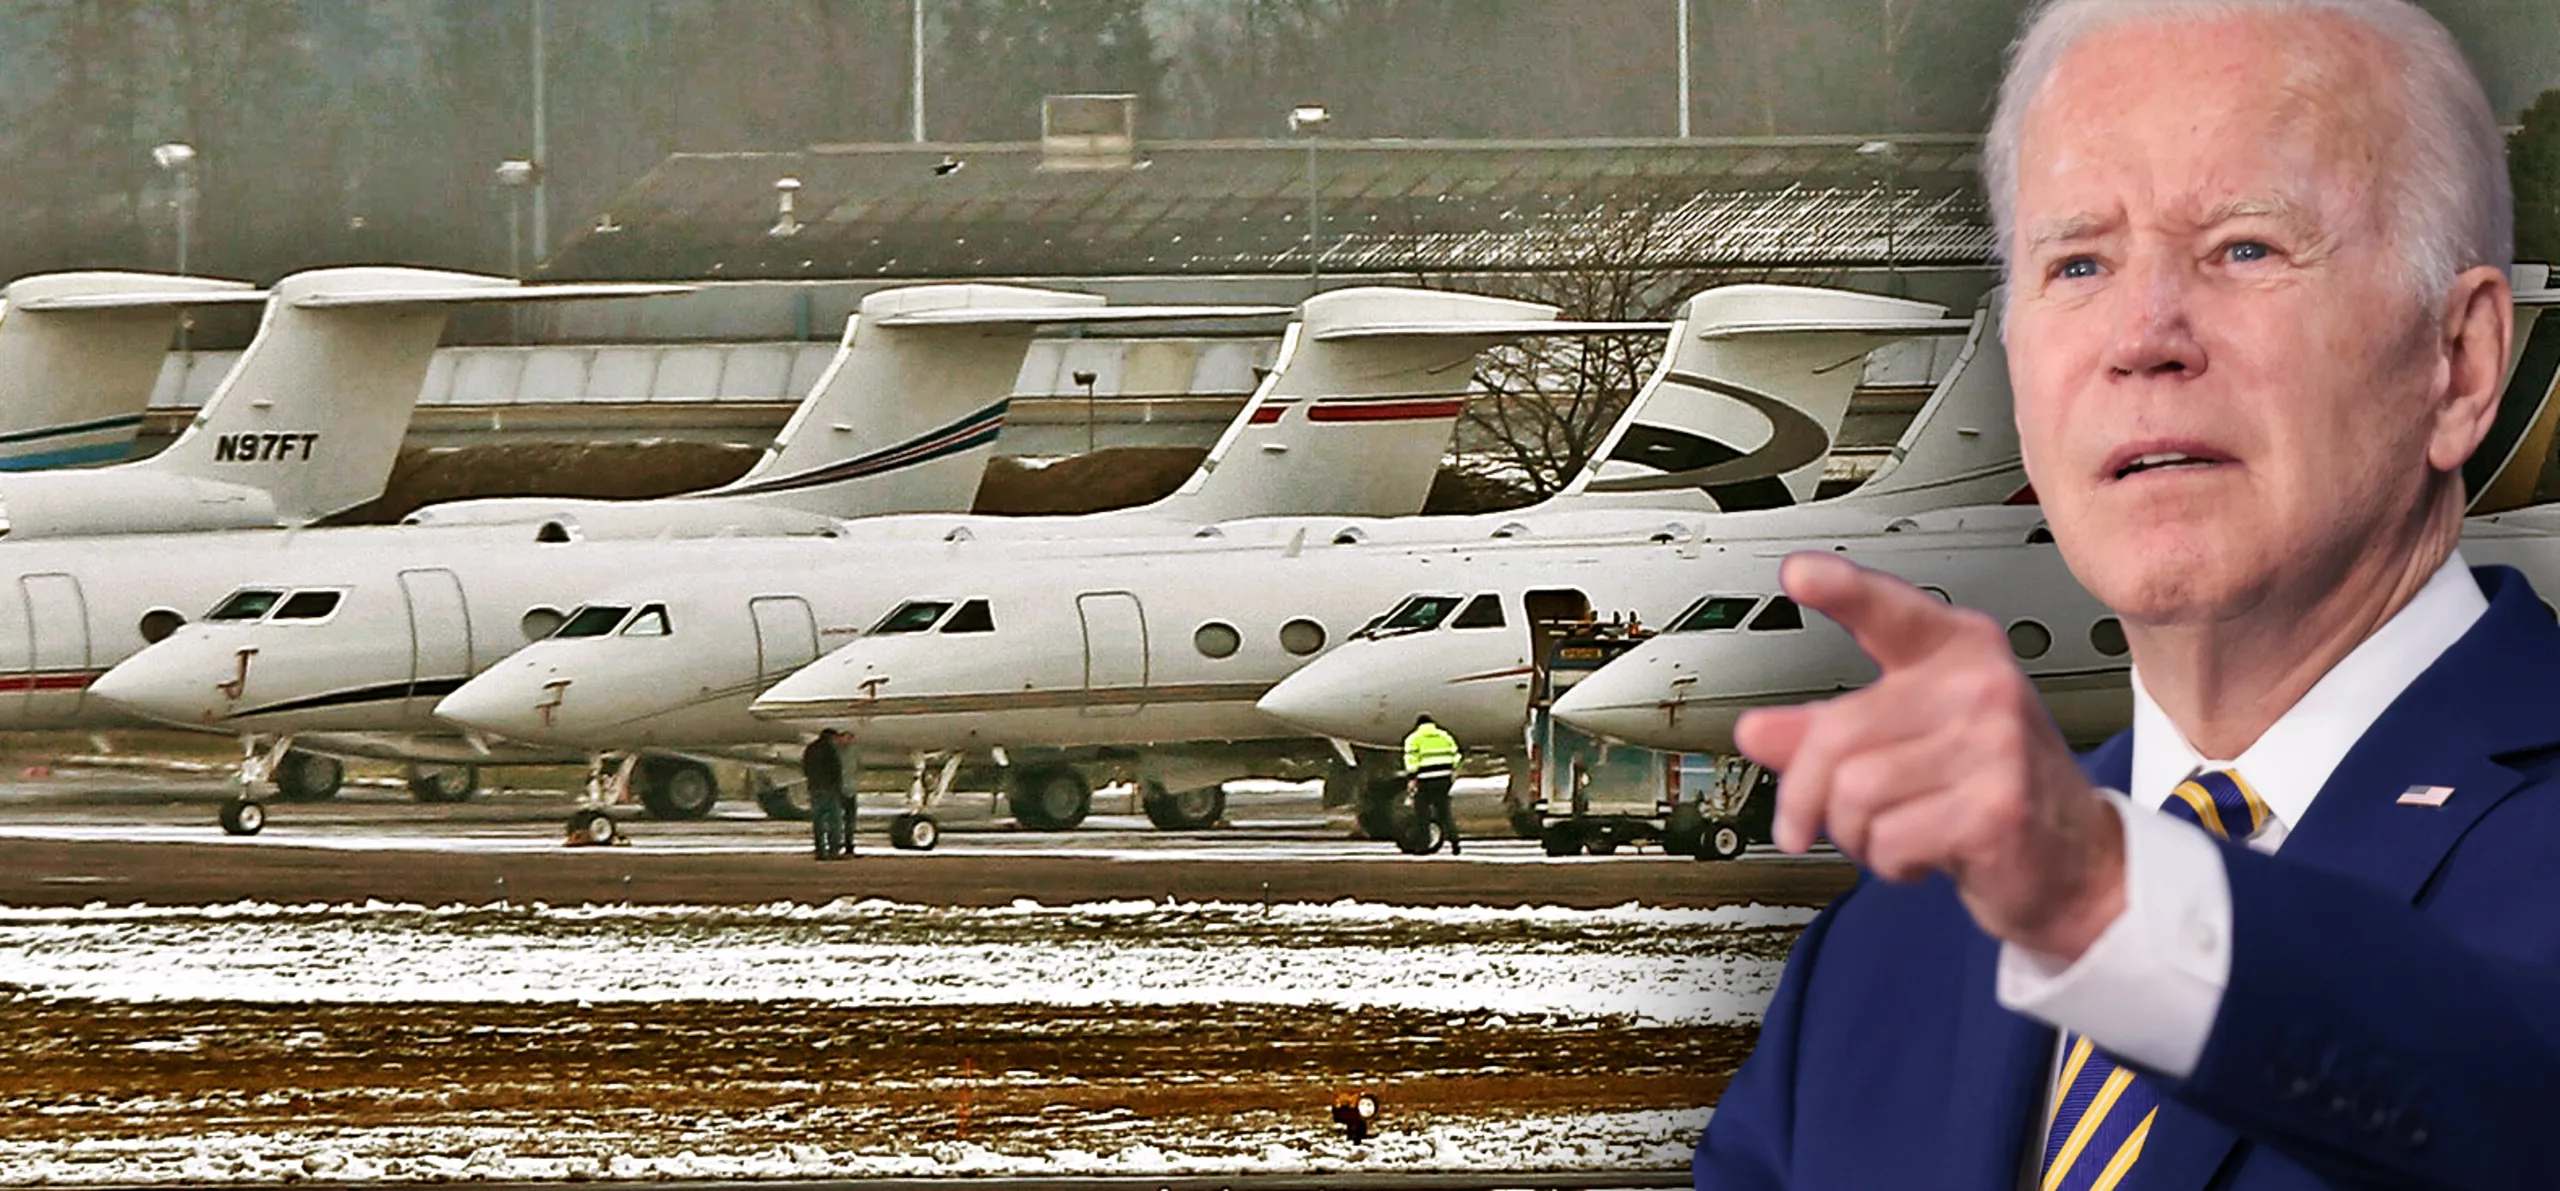 Hypocrite Elites Swarm Davos in Private Jets to Lecture World About Climate Crisis